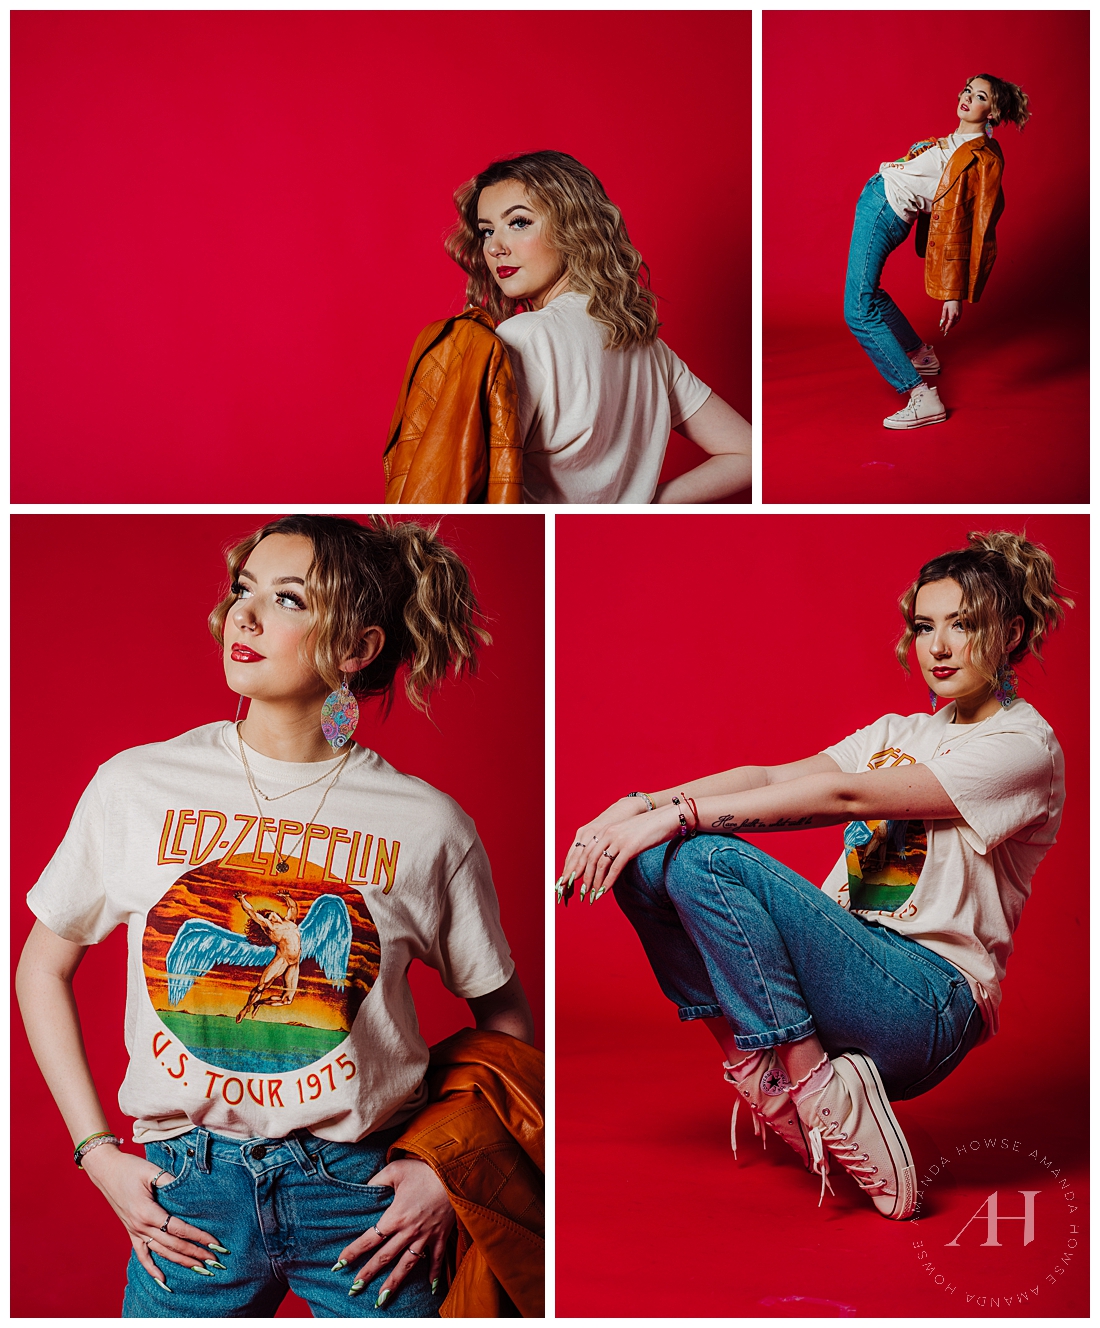 Fun Styled Shoot Inspired by the 70s | How to Style a Band T-Shirt for Portraits, Led Zeppelin T-Shirt, Pleather Jacket, Converse Sneakers | Photographed by Tacoma's Best Photographer Amanda Howse